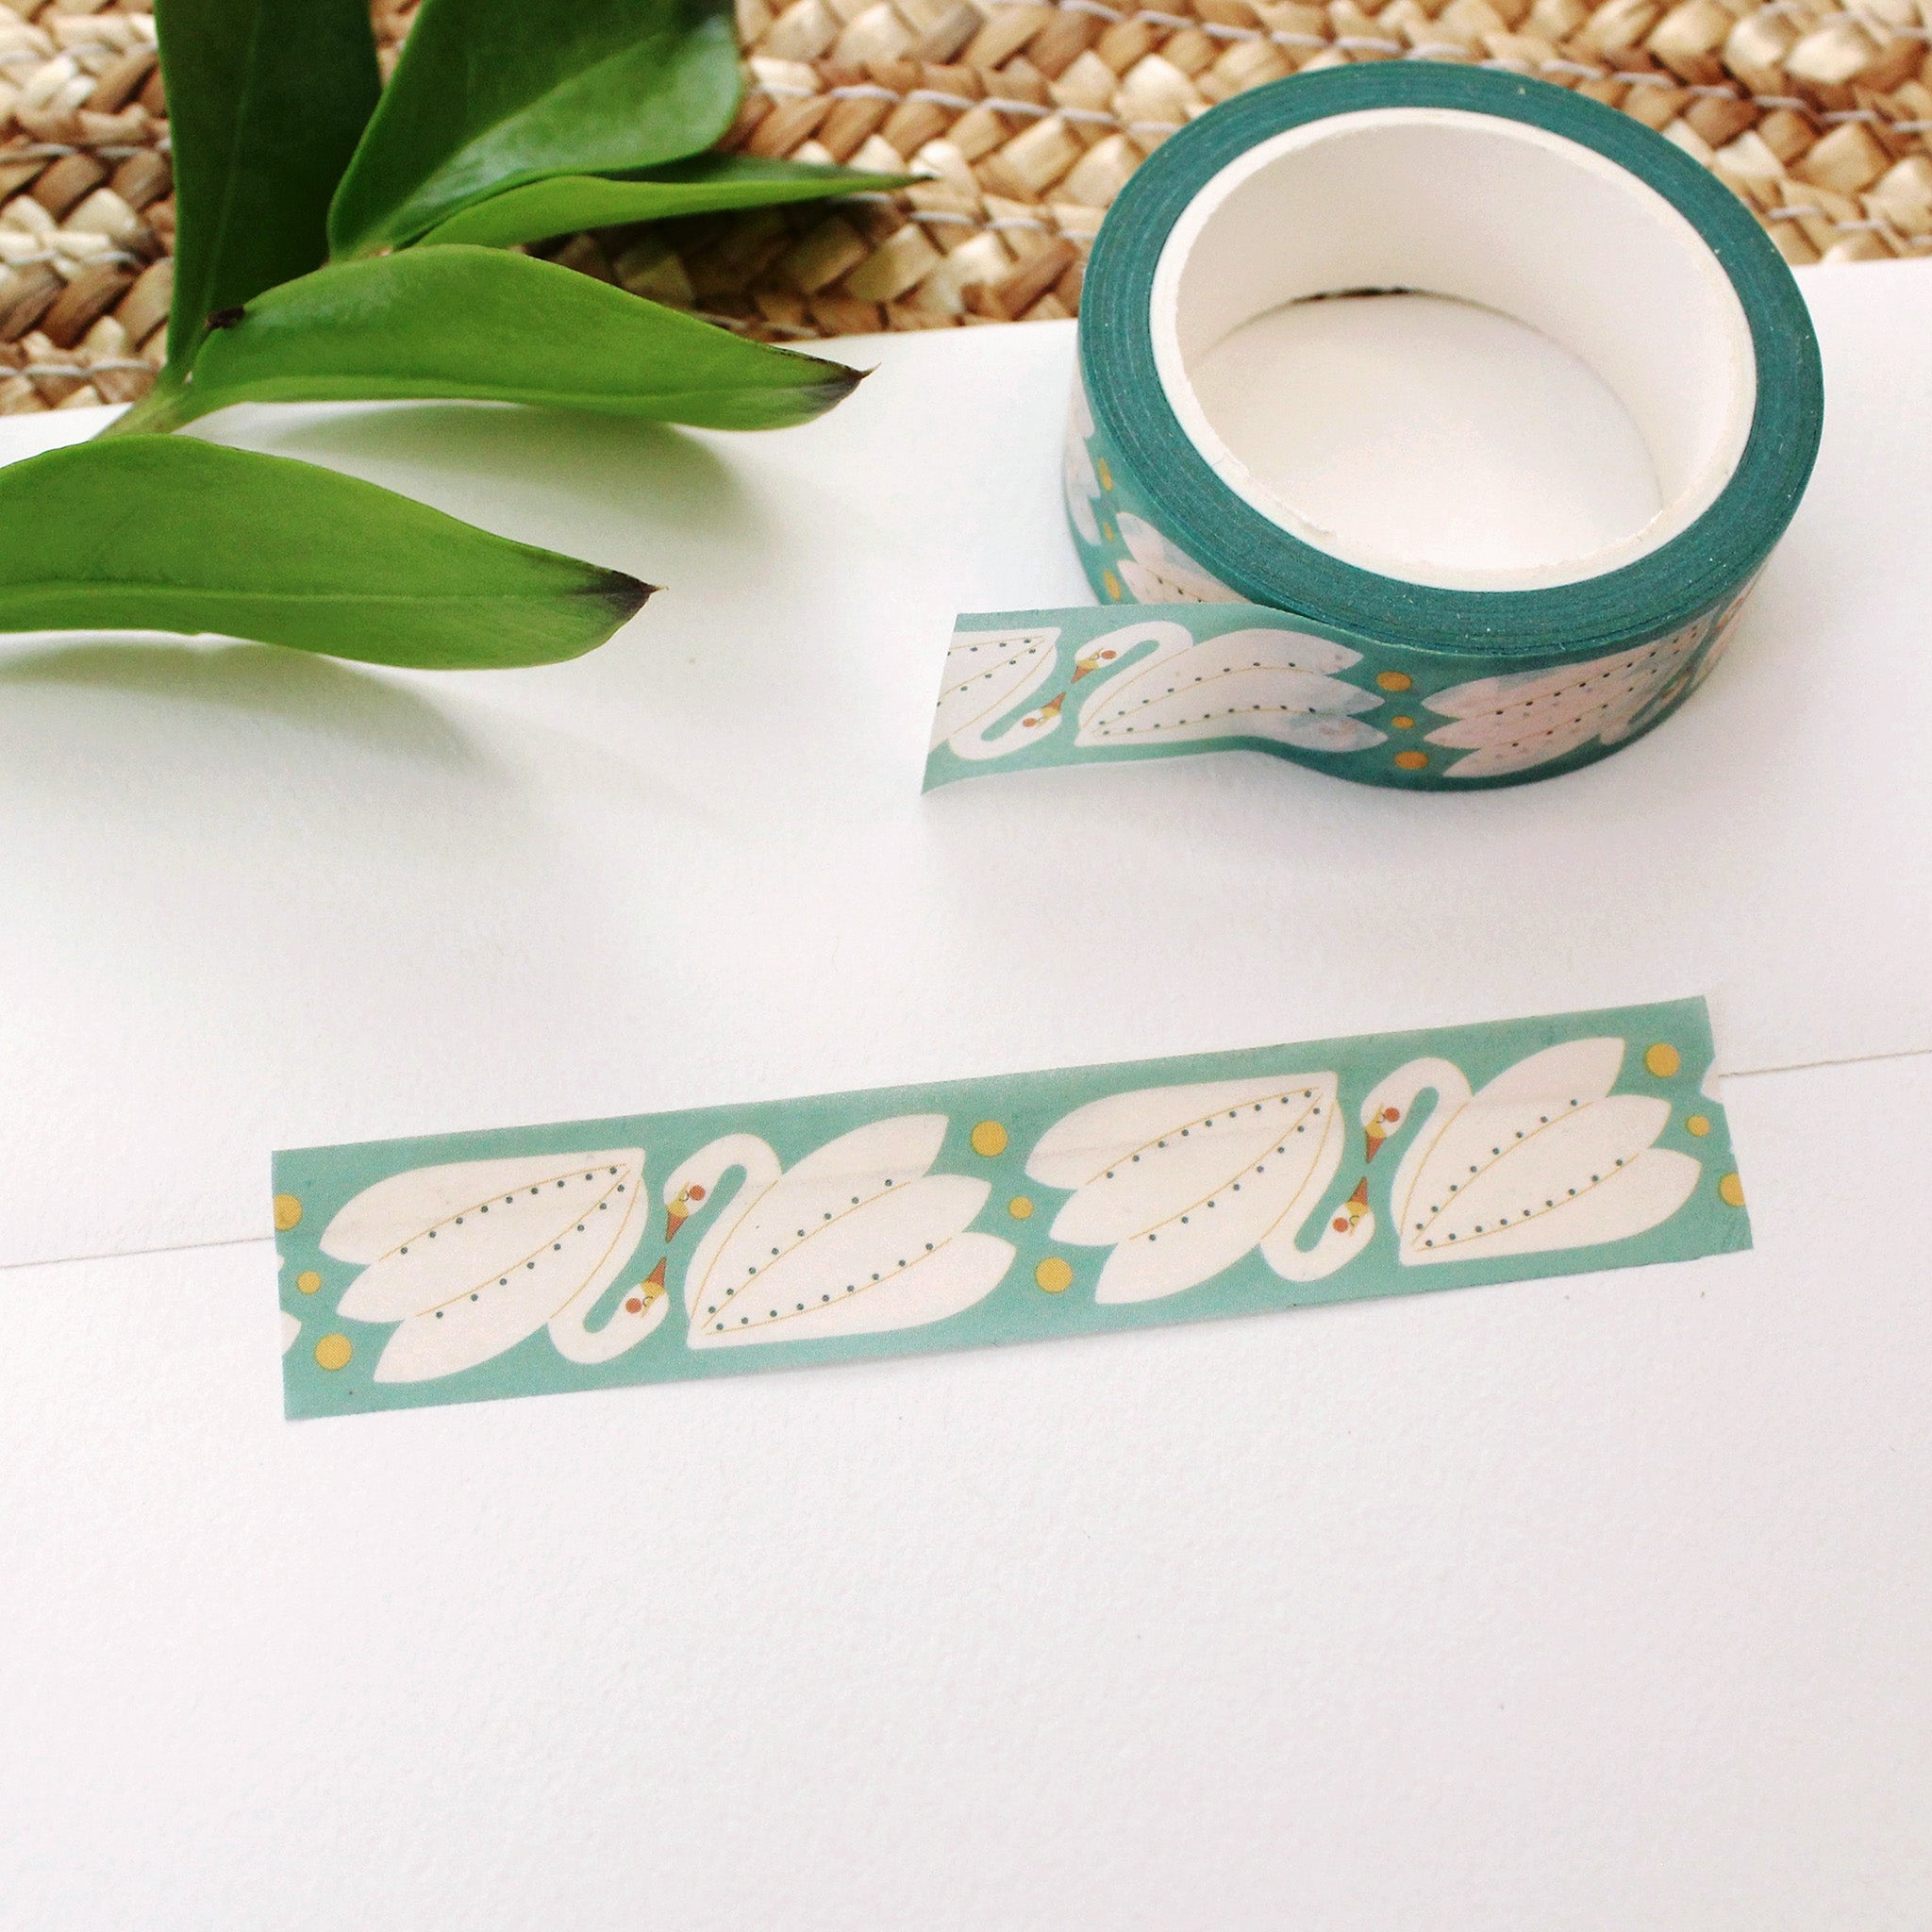 swan washi tape on a teal background with mustard yellow dots.